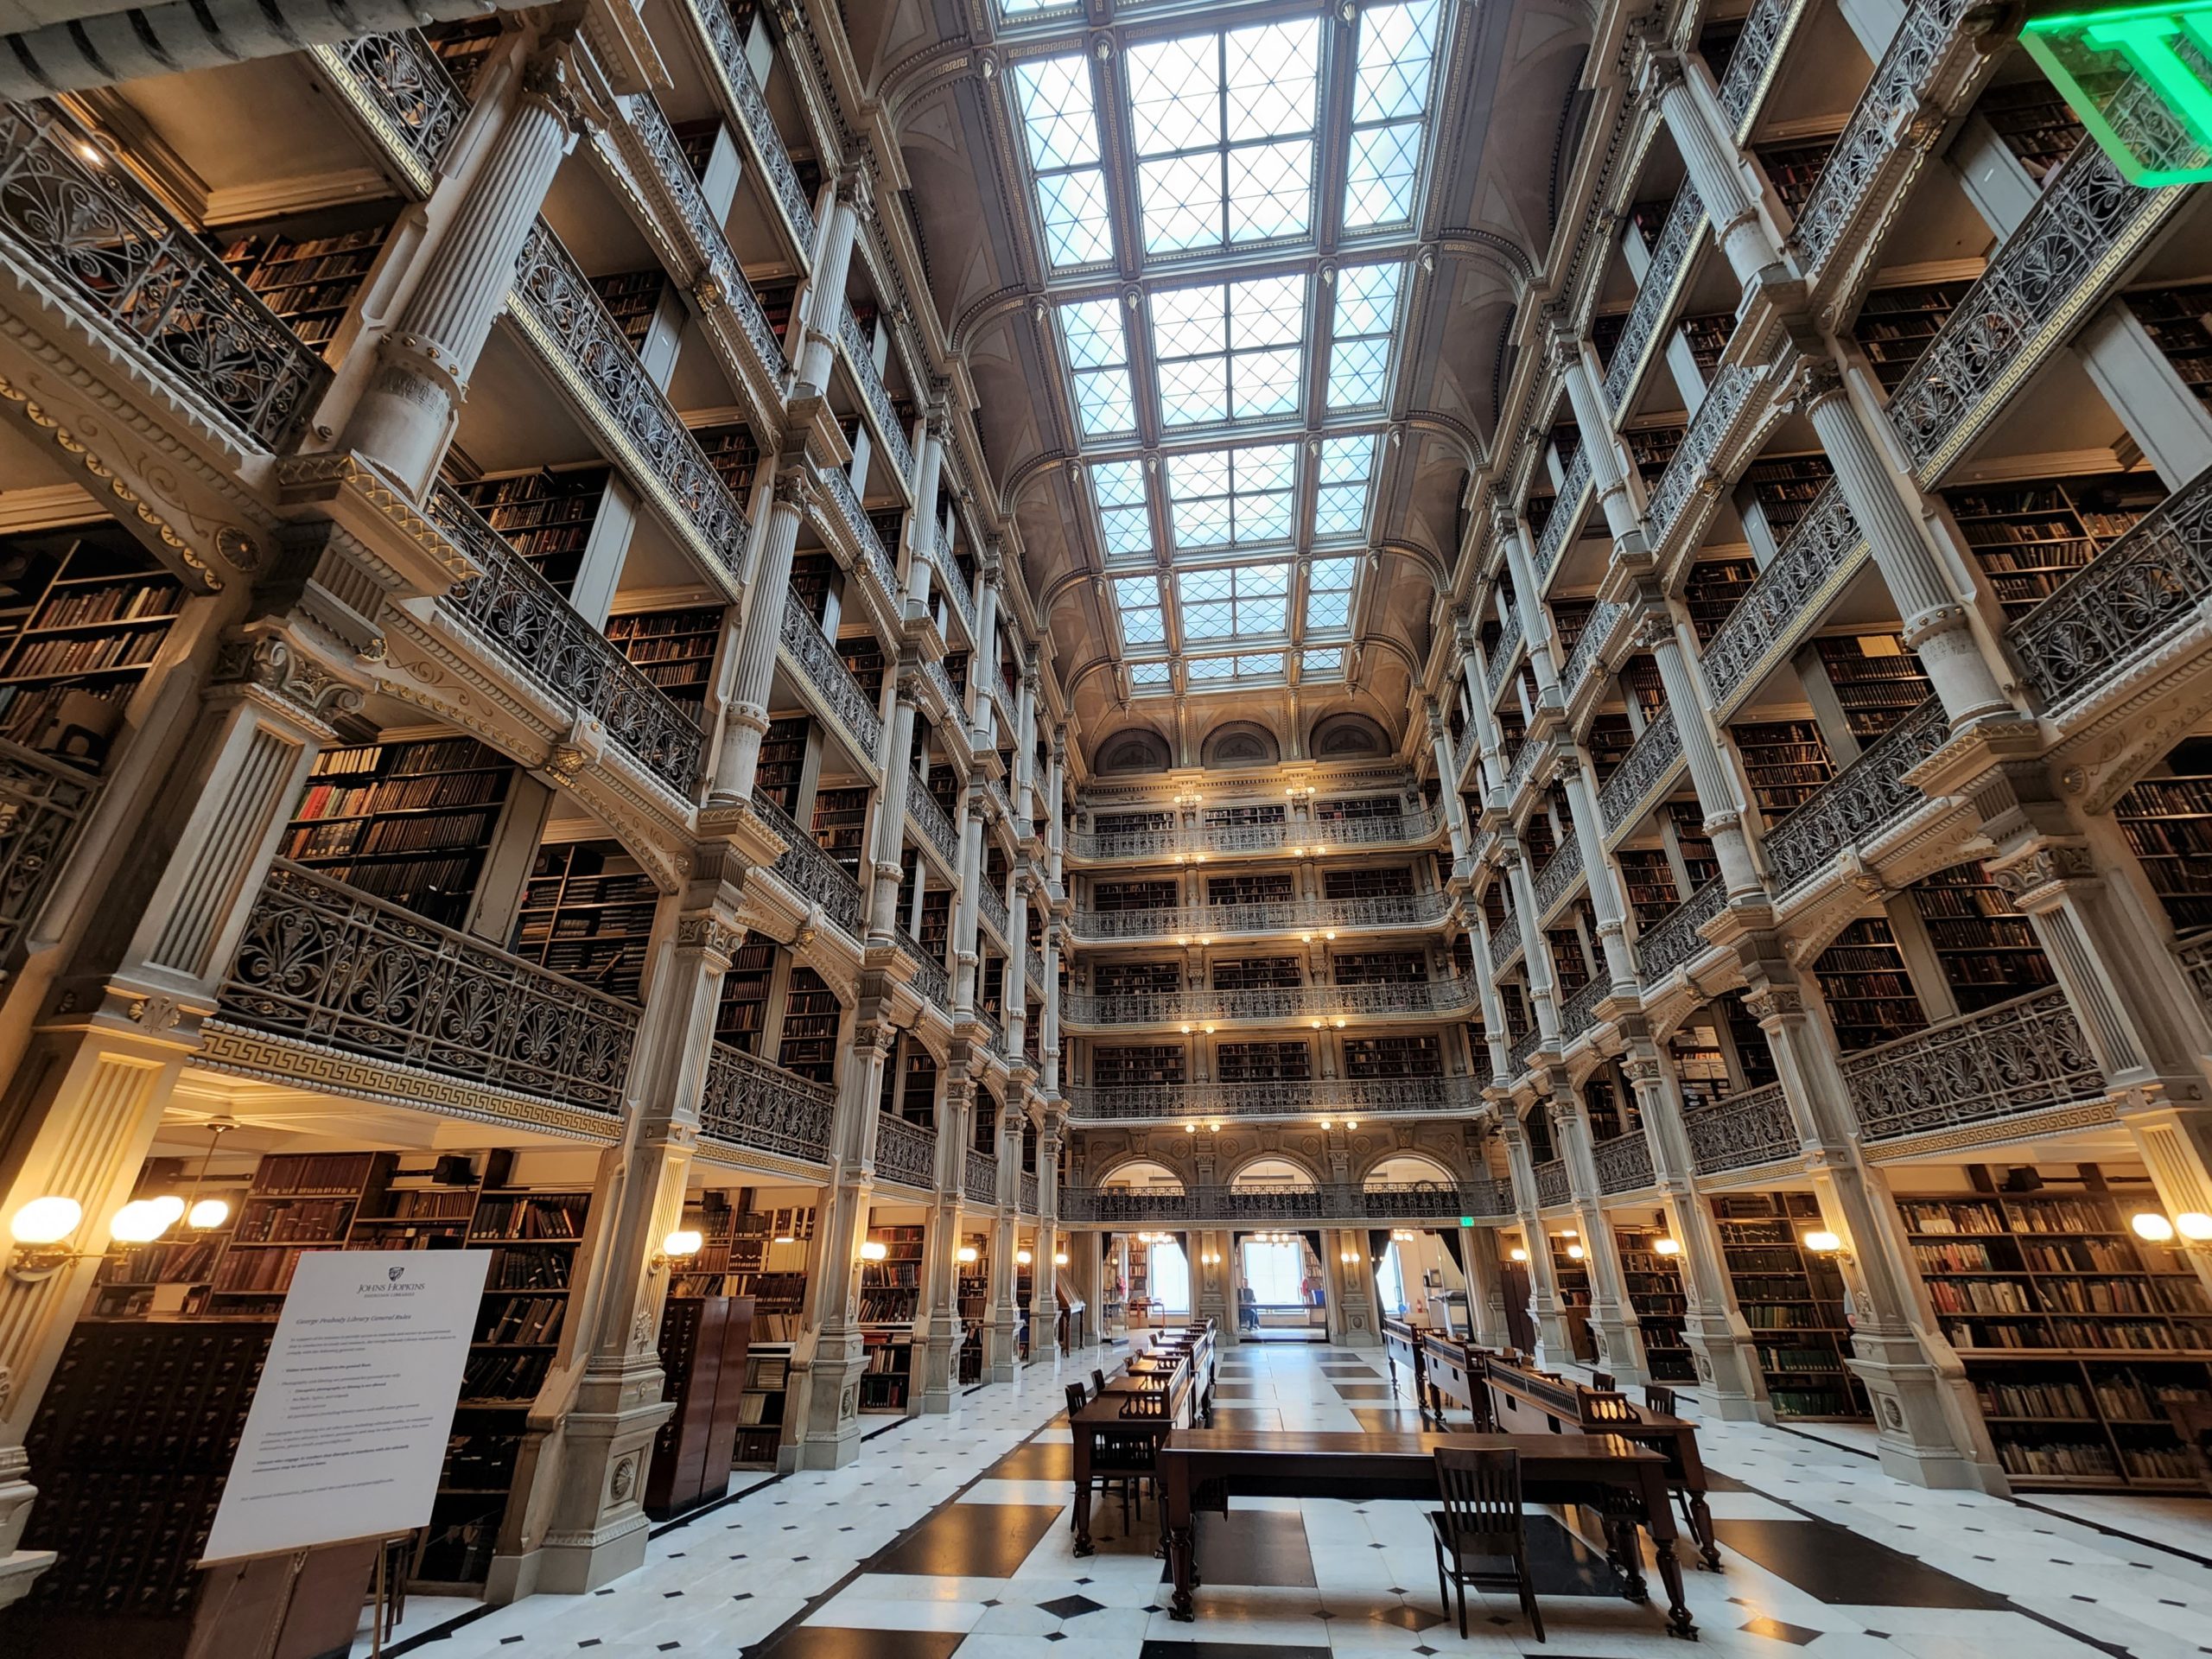 Interior of Peabody Library, showing the very ornate, aesthetic stacks and skylight.